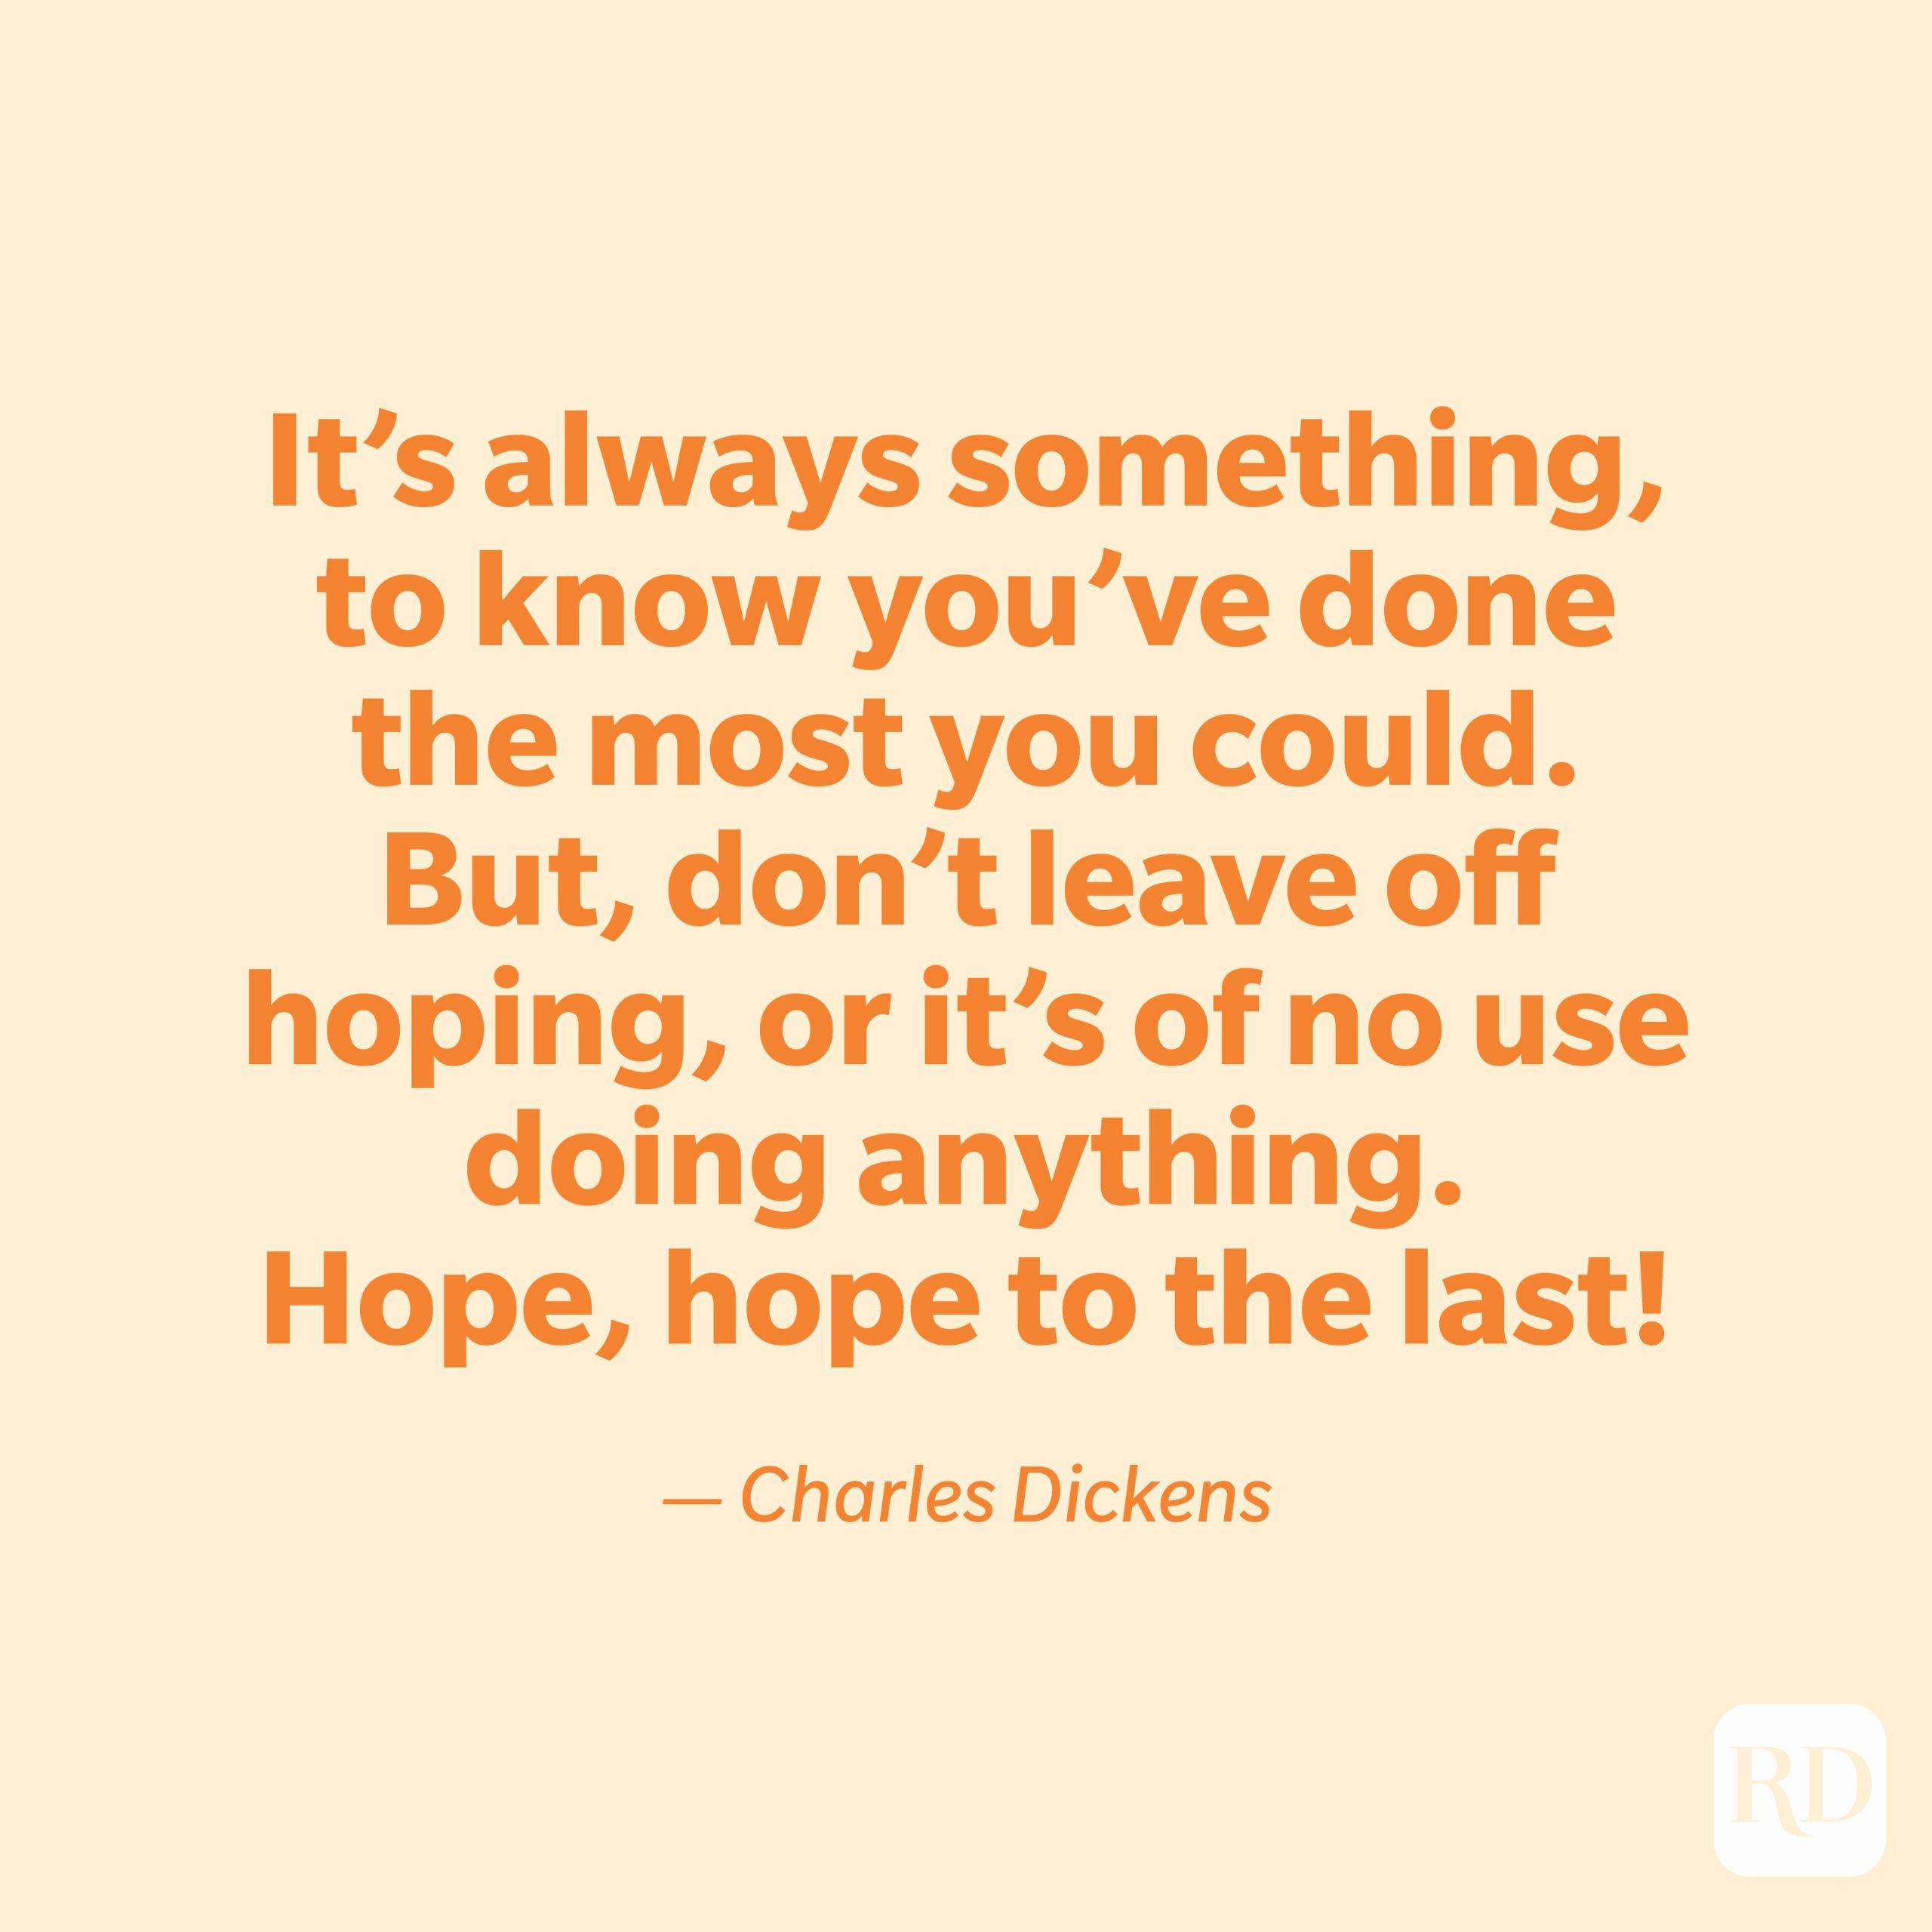 "It's always something, to know you've done the most you could. But, don't leave off hoping, or it's of no use doing anything. Hope, hope to the last!" —Charles Dickens